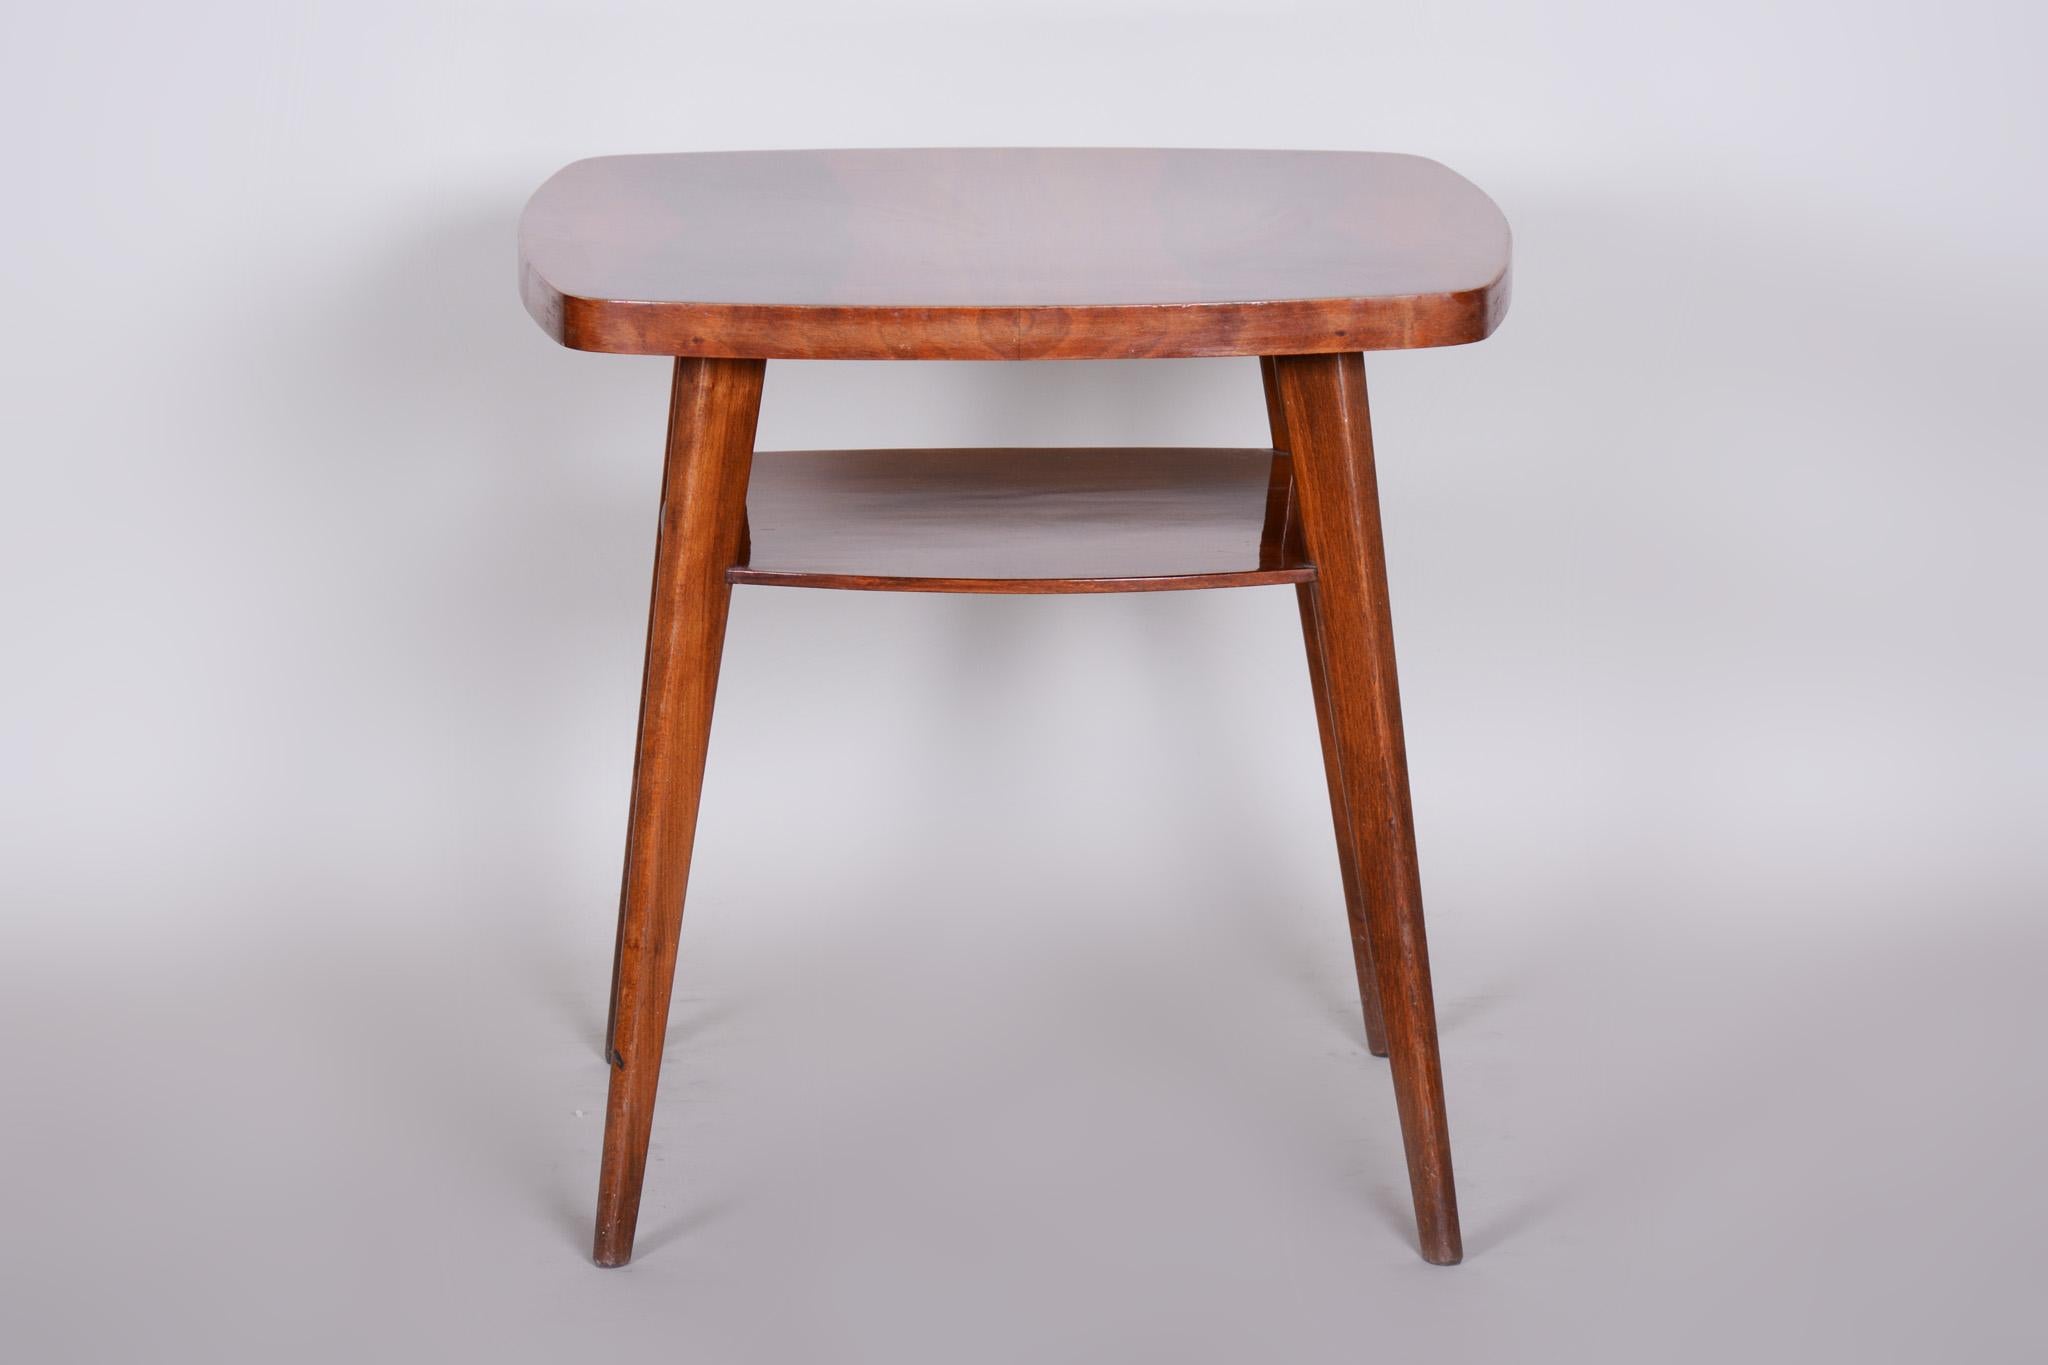 Small table, made in Czechia
Czech Mid-Century Modern 
Material: Walnut
Period: 1950-1959.